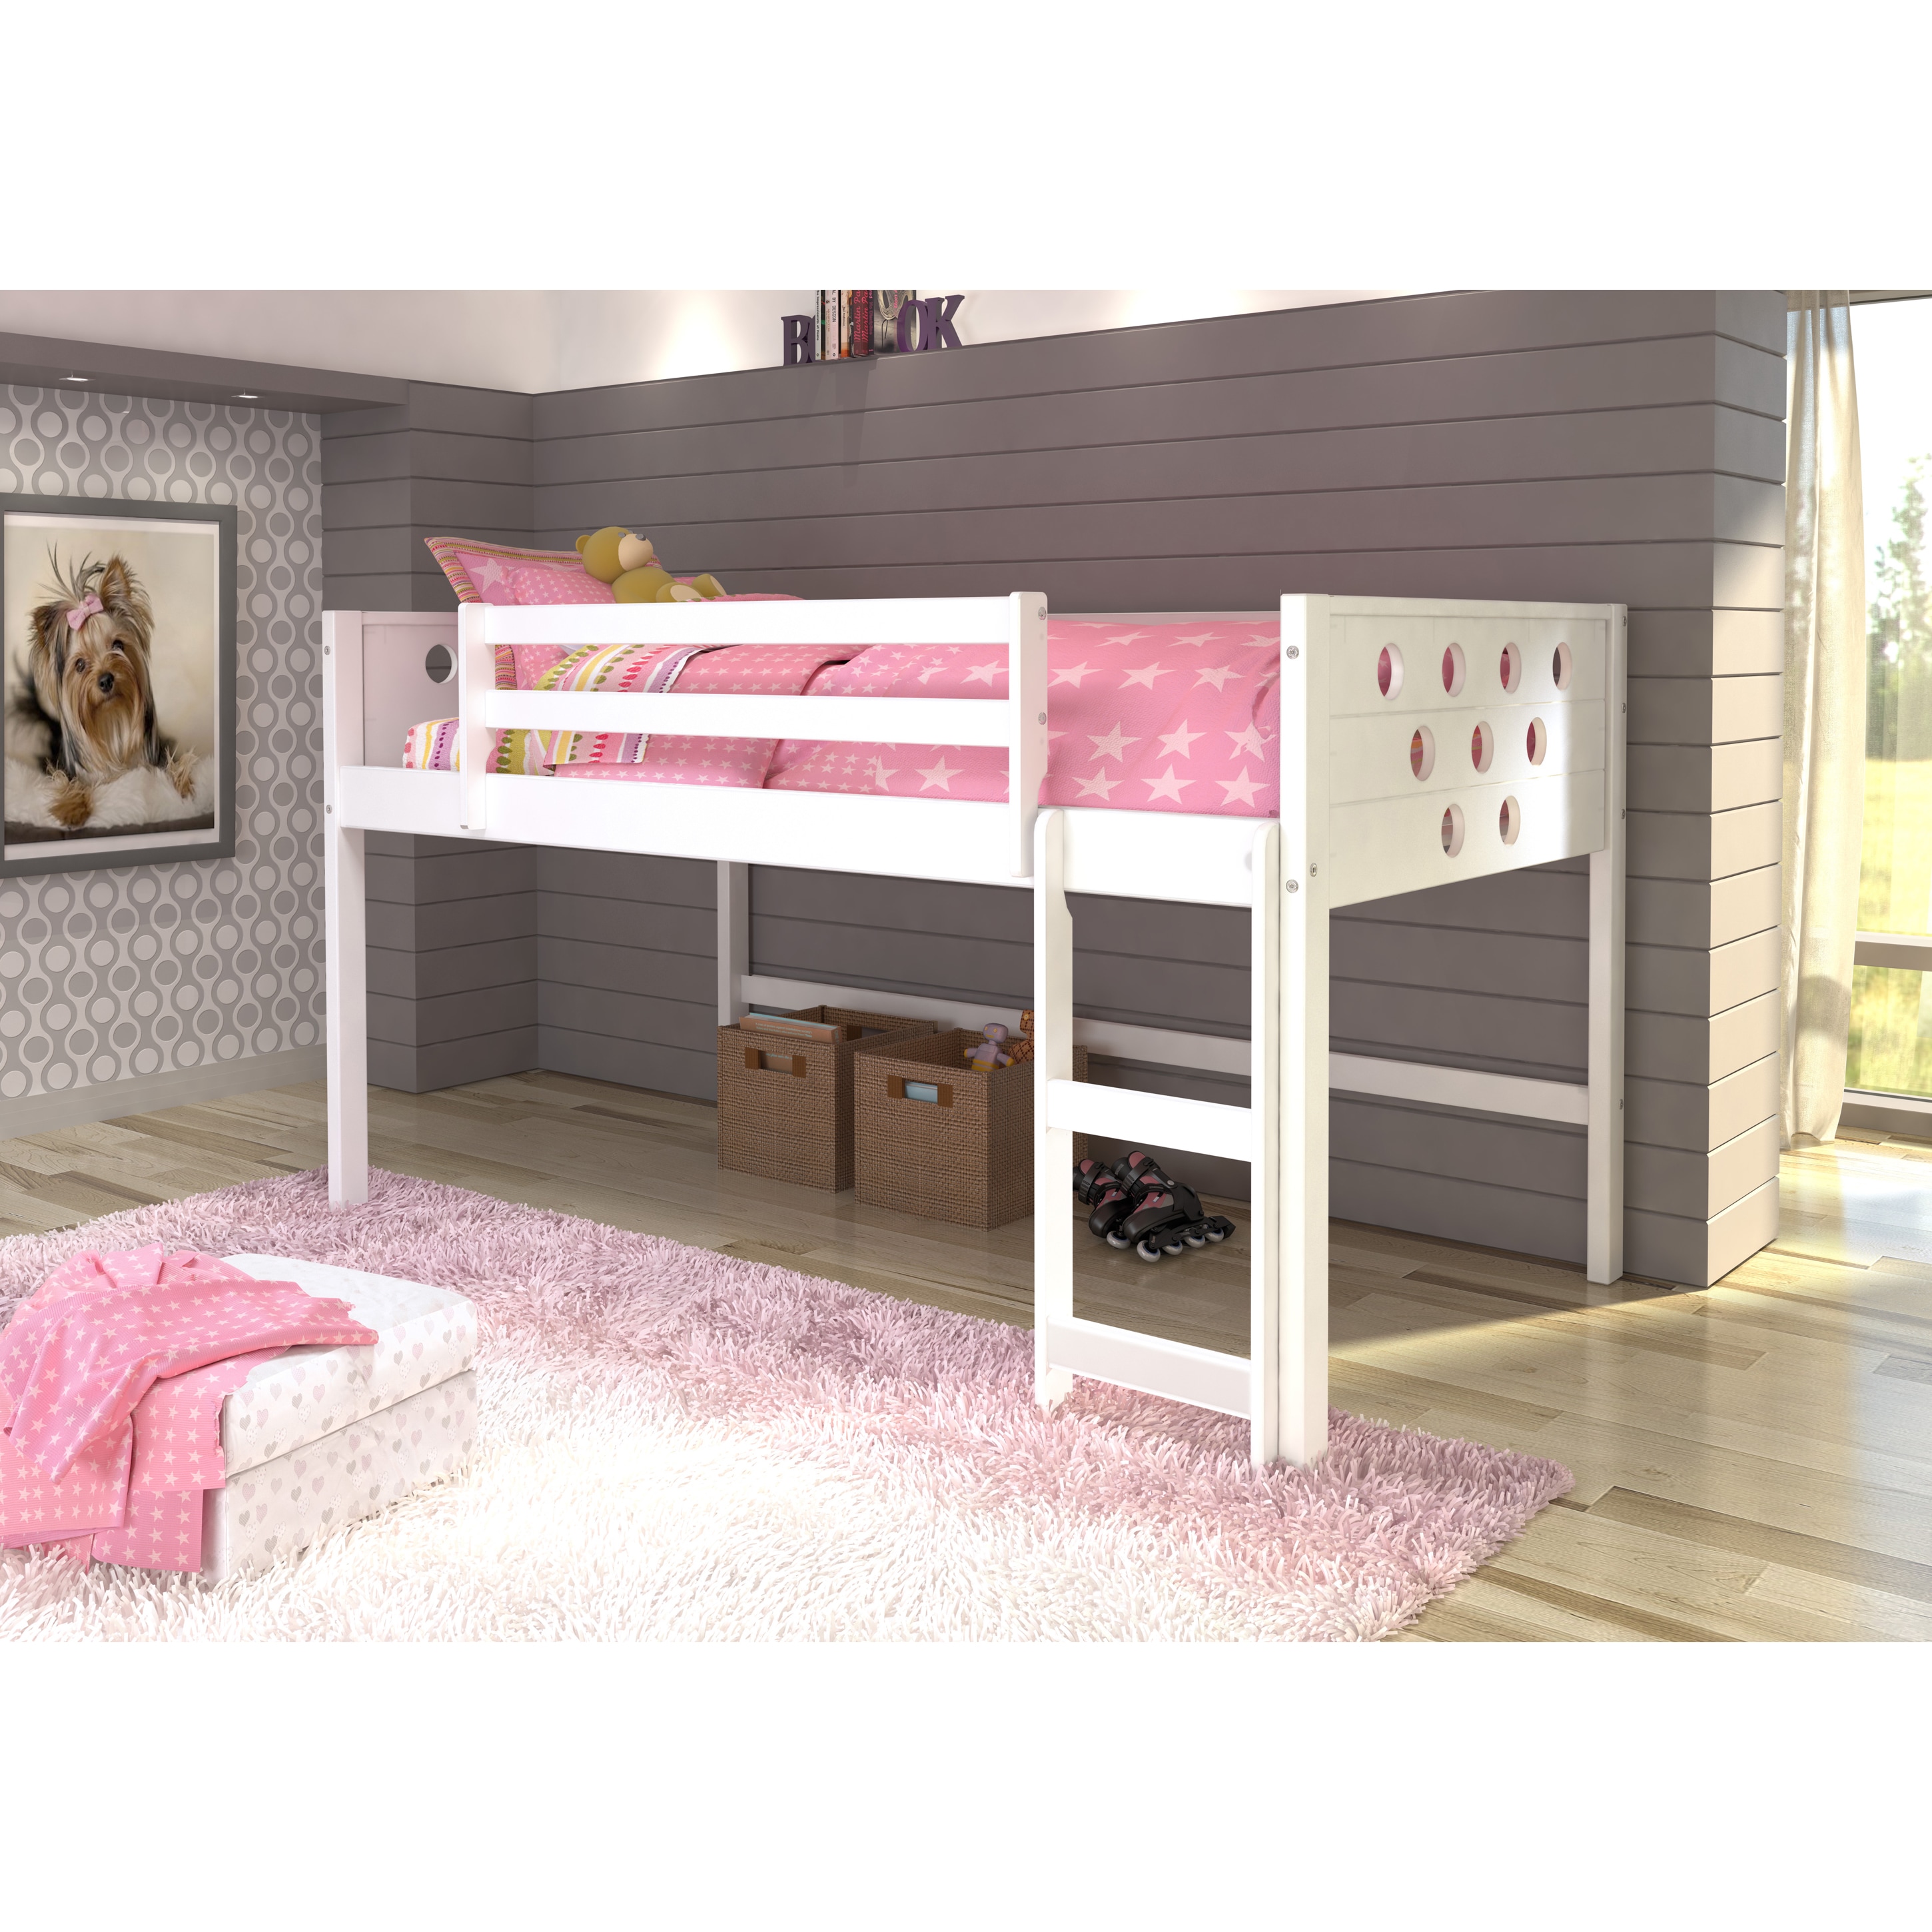 twin bed with play area underneath